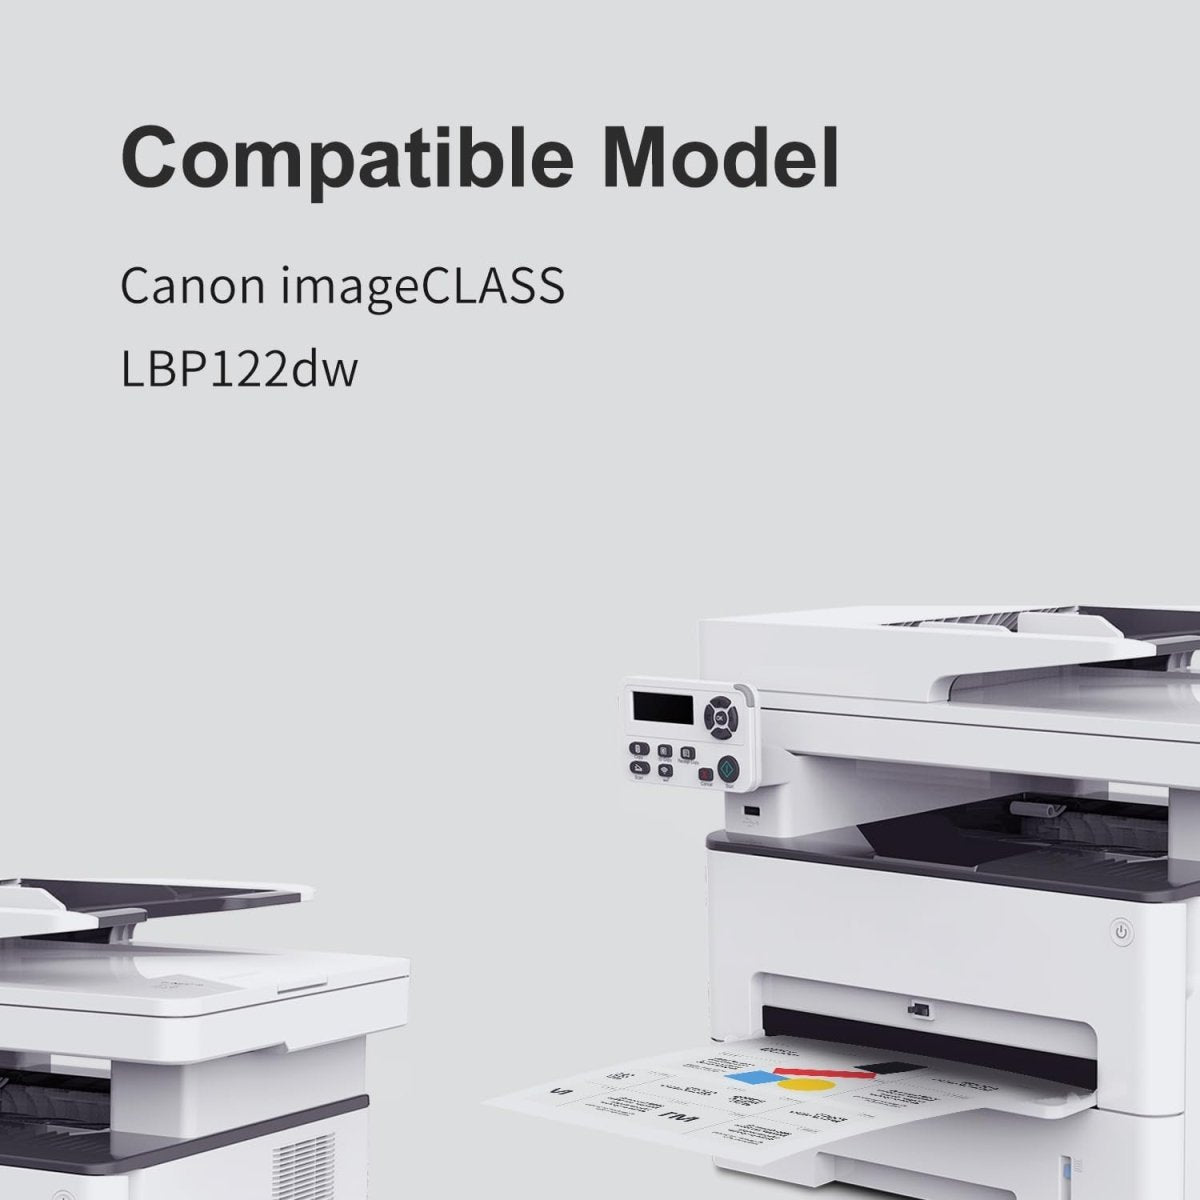 Compatible Canon 071 Black Toner Cartridge - With Chip - Linford Office:Printer Ink & Toner Cartridge